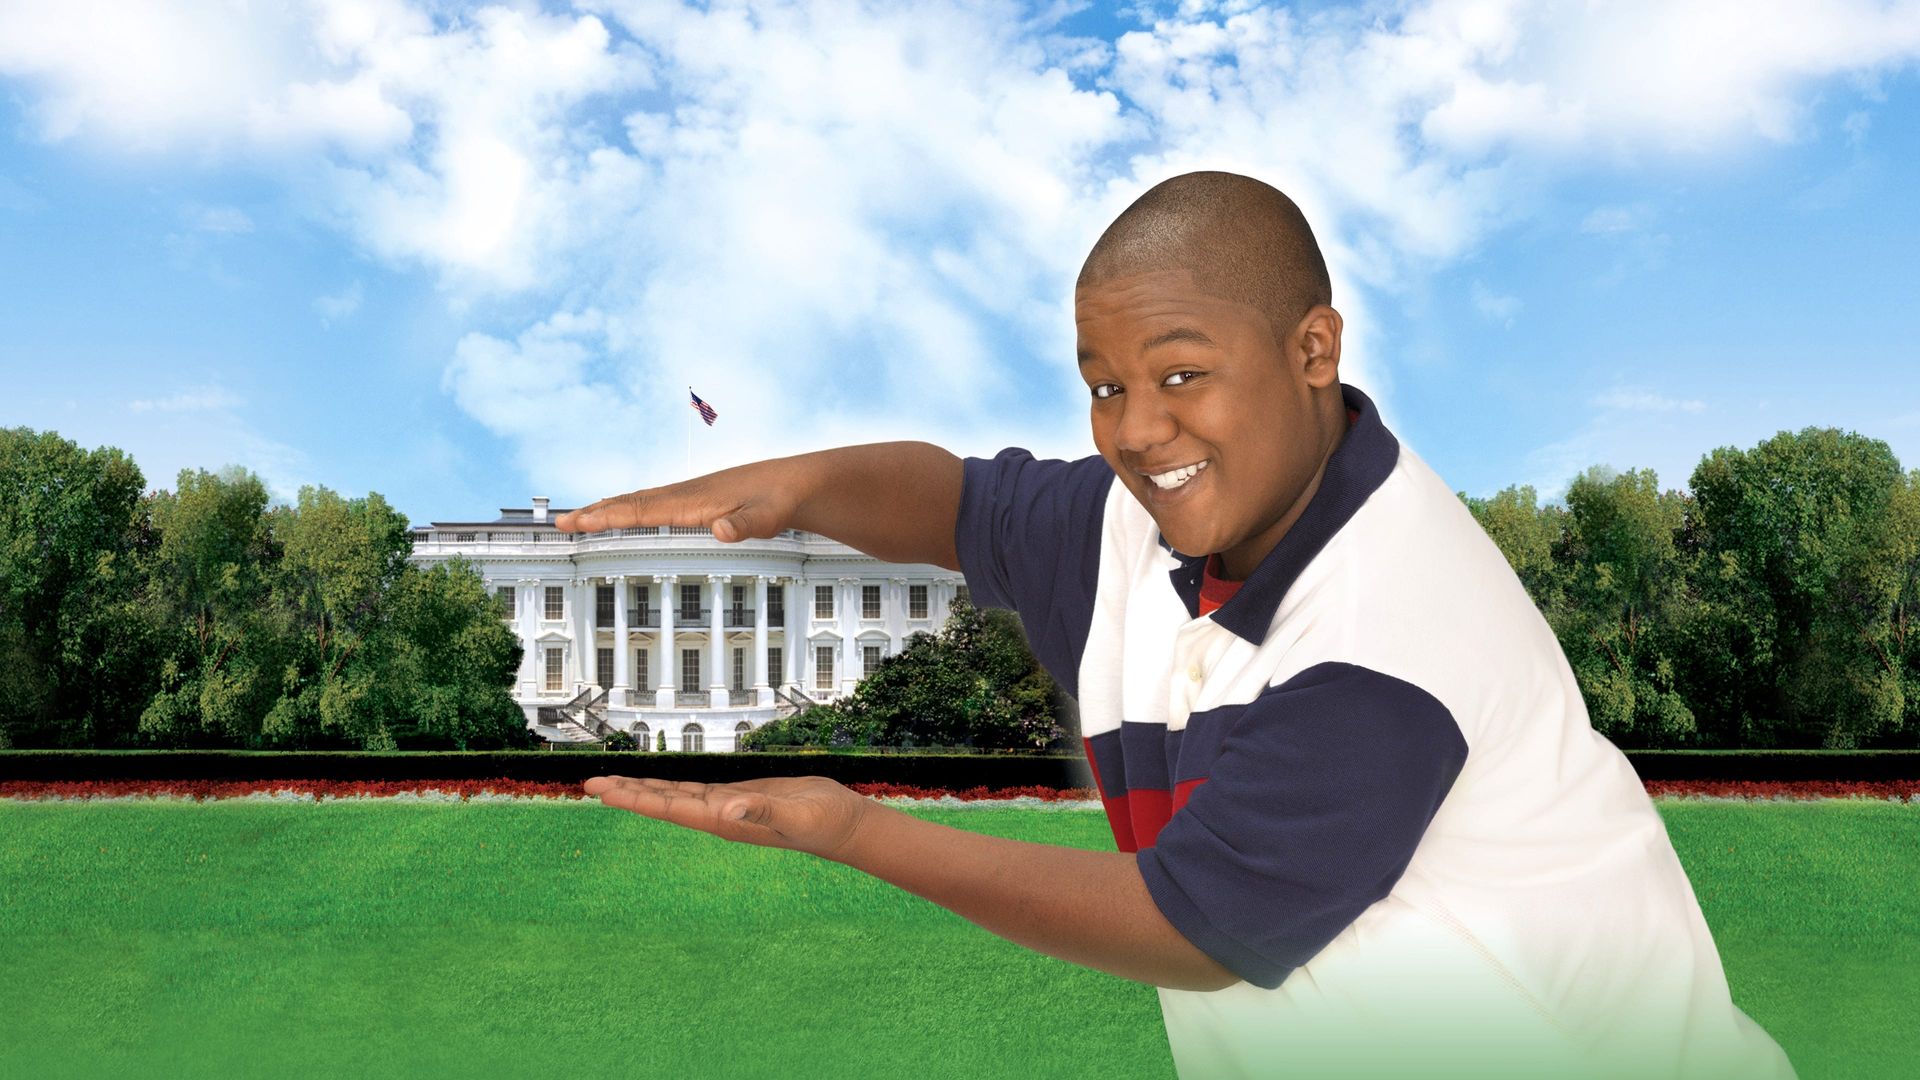 Cory in the House background